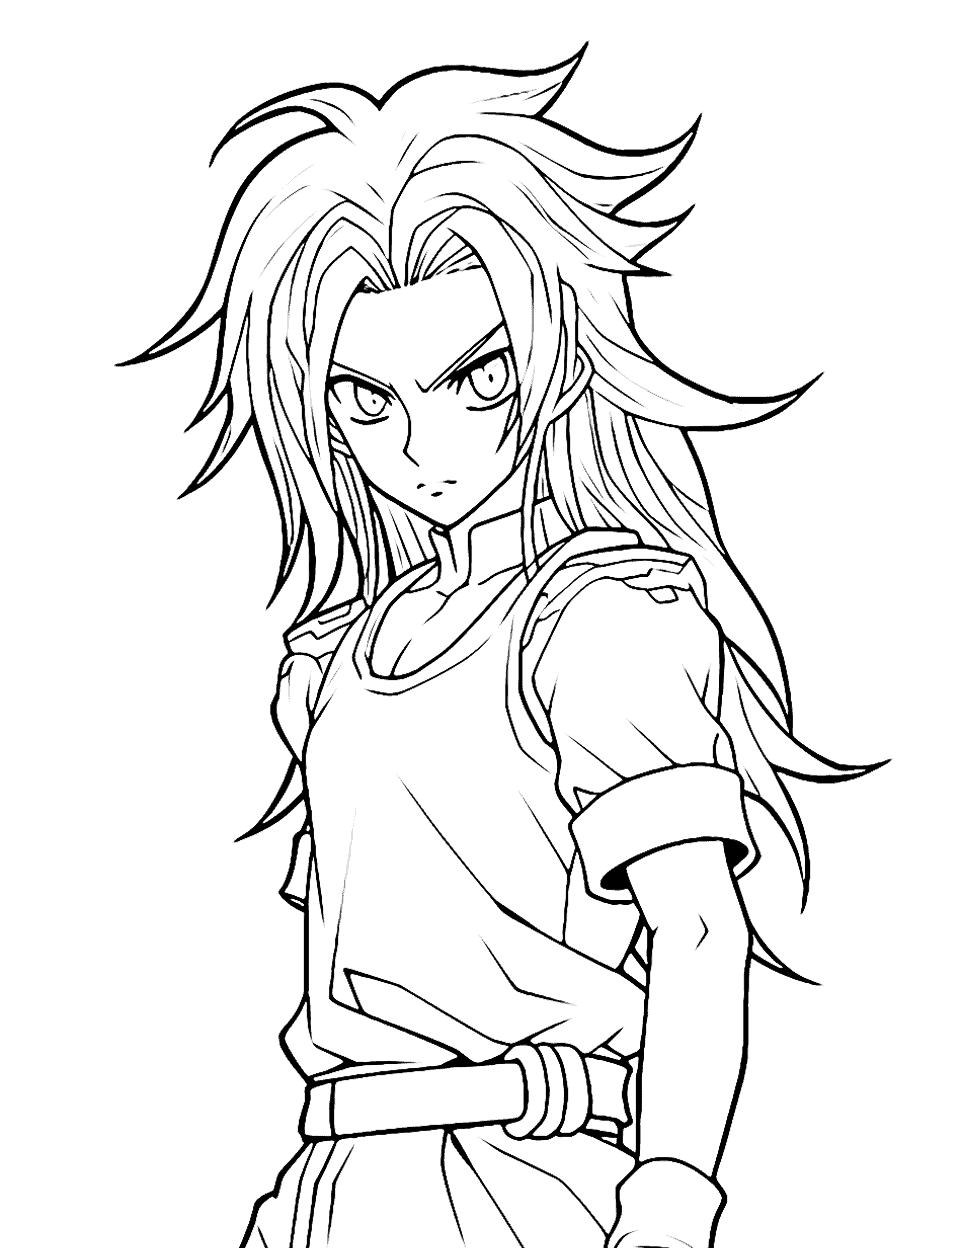 Long-Haired Anime Boy Coloring Page - An anime boy with long, flowing hair, showcasing a cool and relaxed pose.